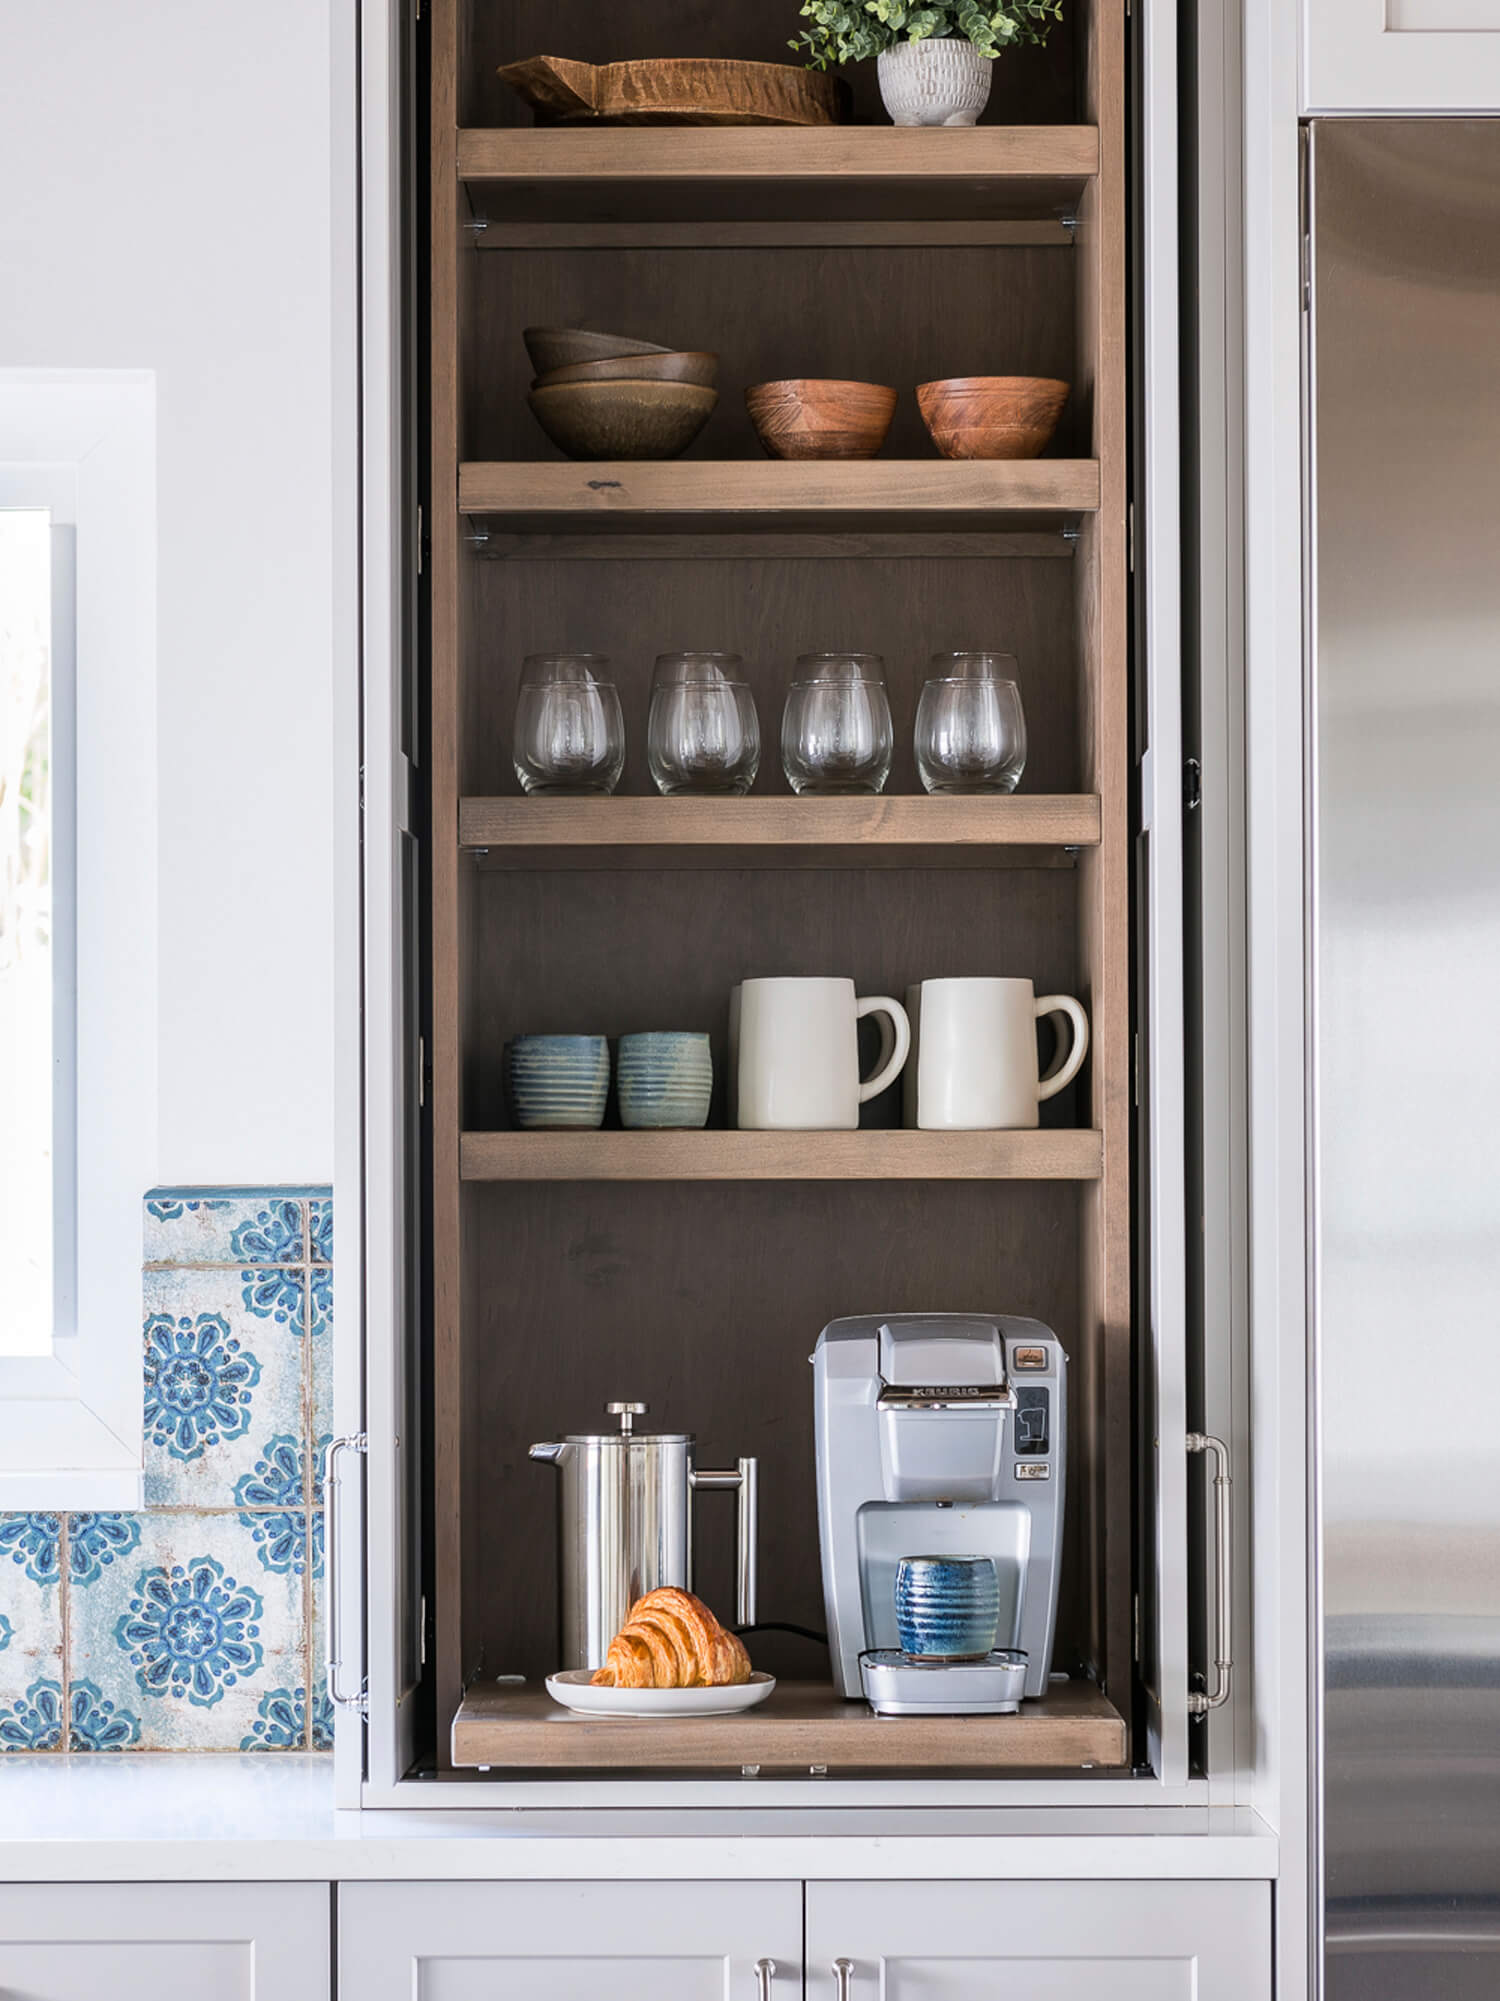 A tall and thin larder cabinet with pocket doors created to be a hidden coffee station.